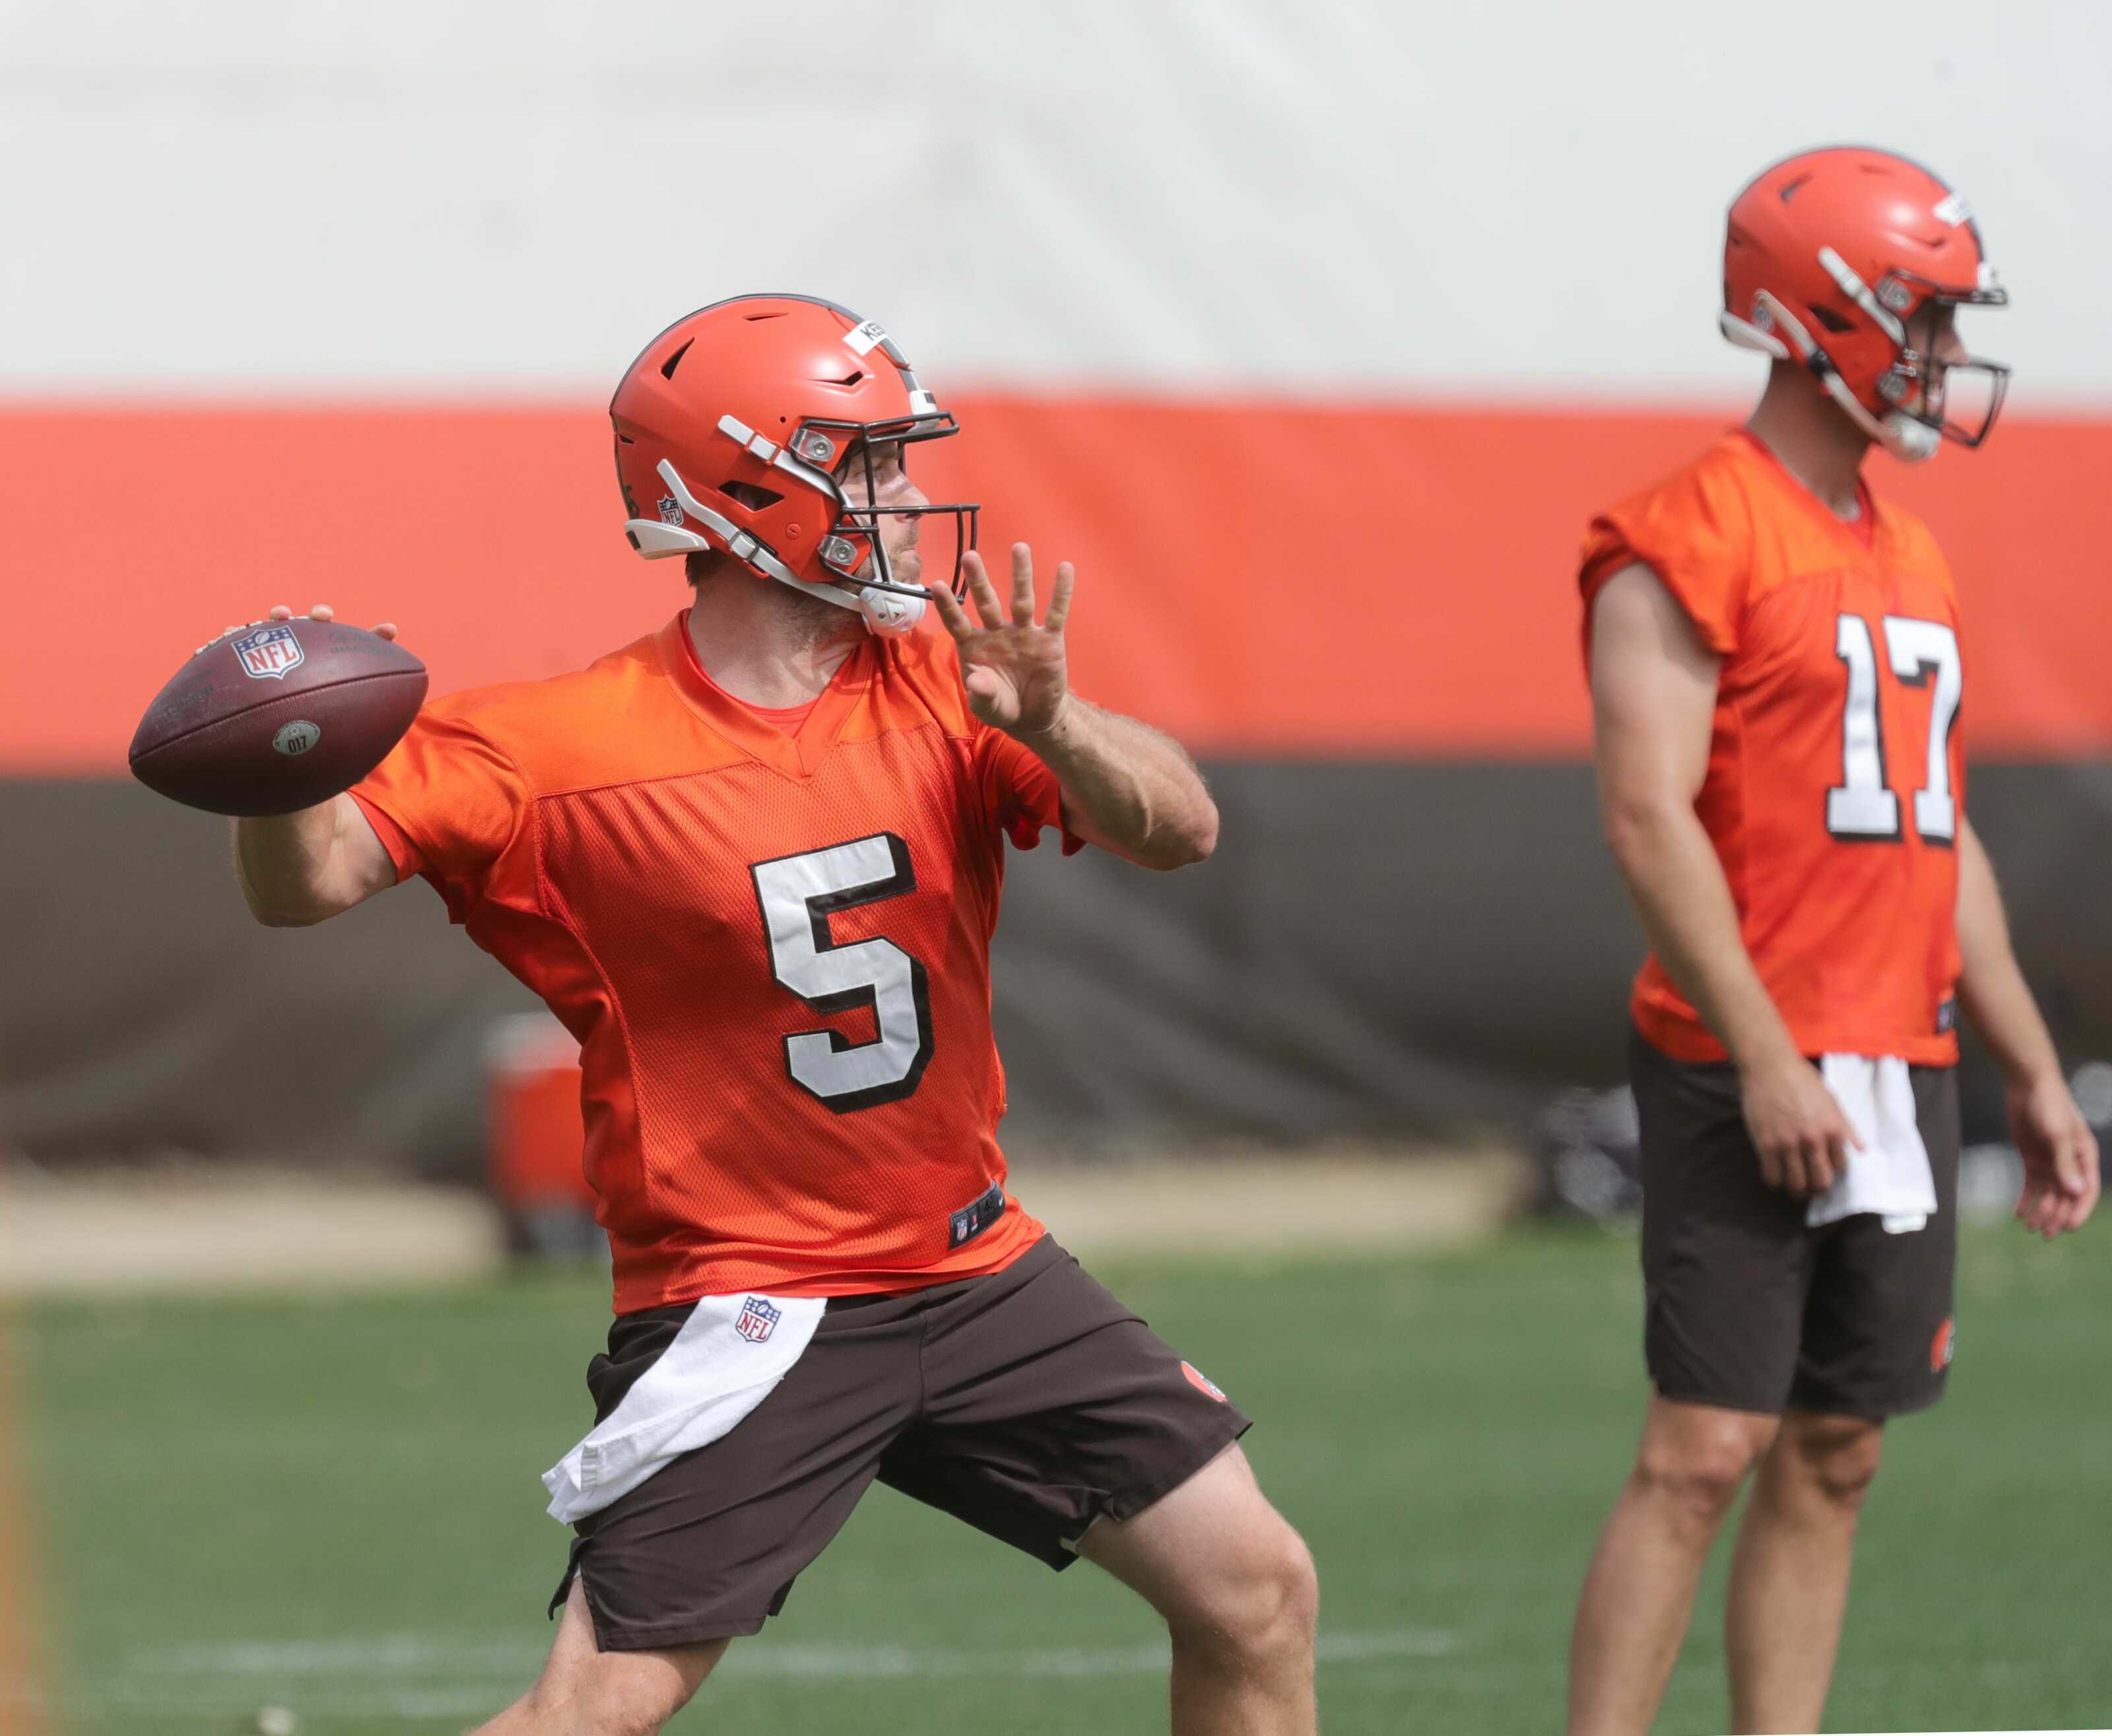 Cleveland Browns: 20 practice squad candidates for 2021 season